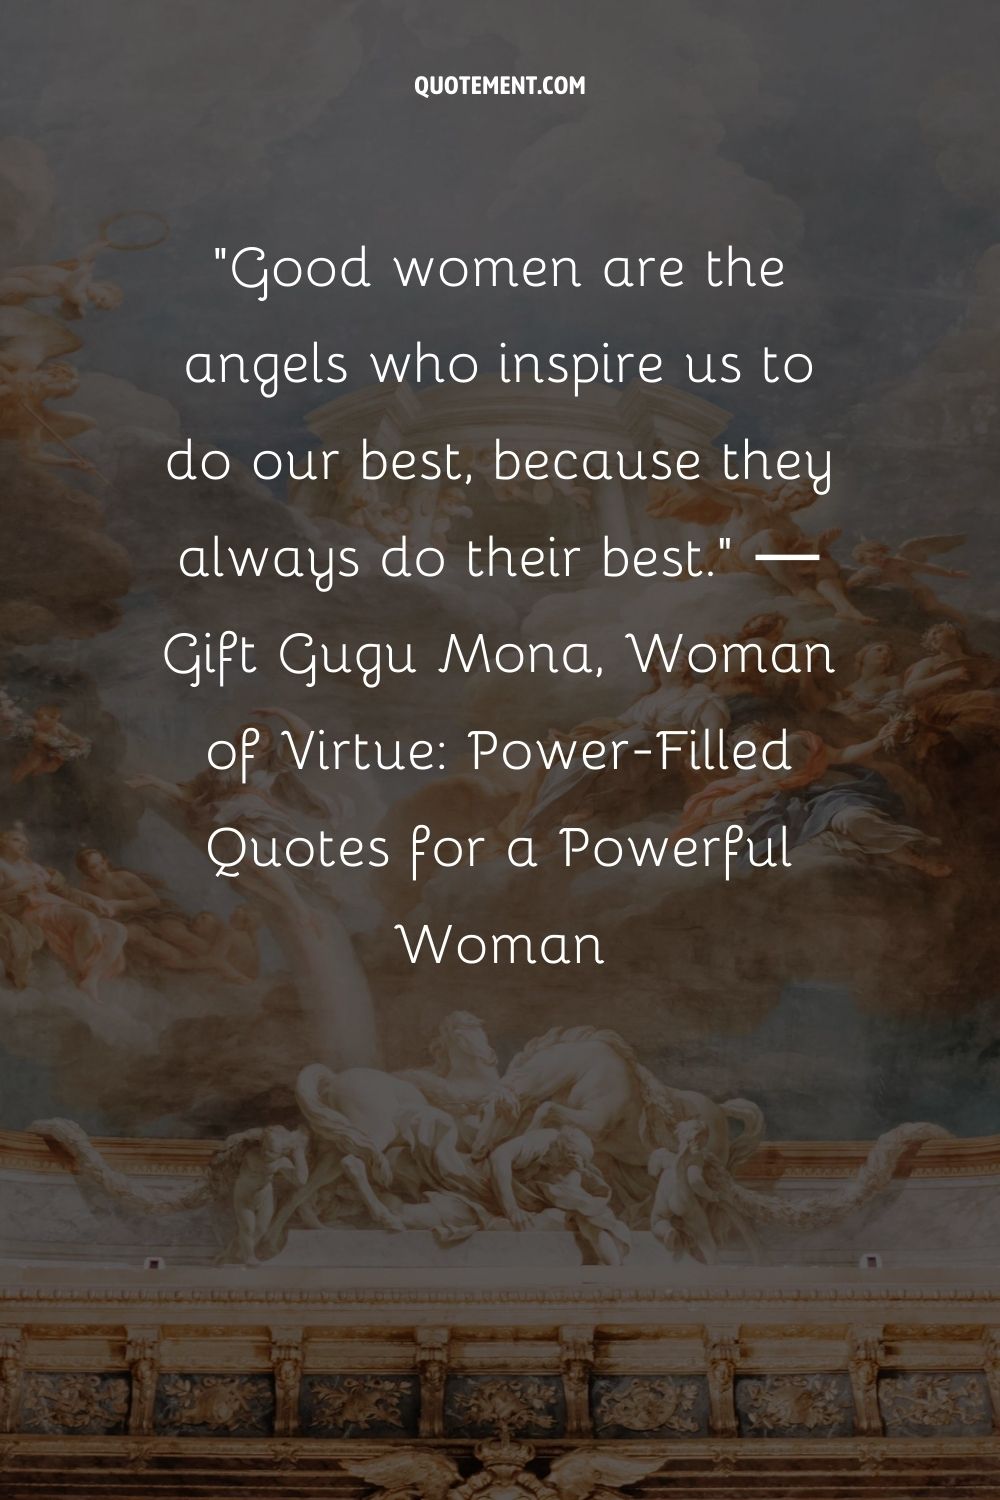 Good women are the angels who inspire us to do our best